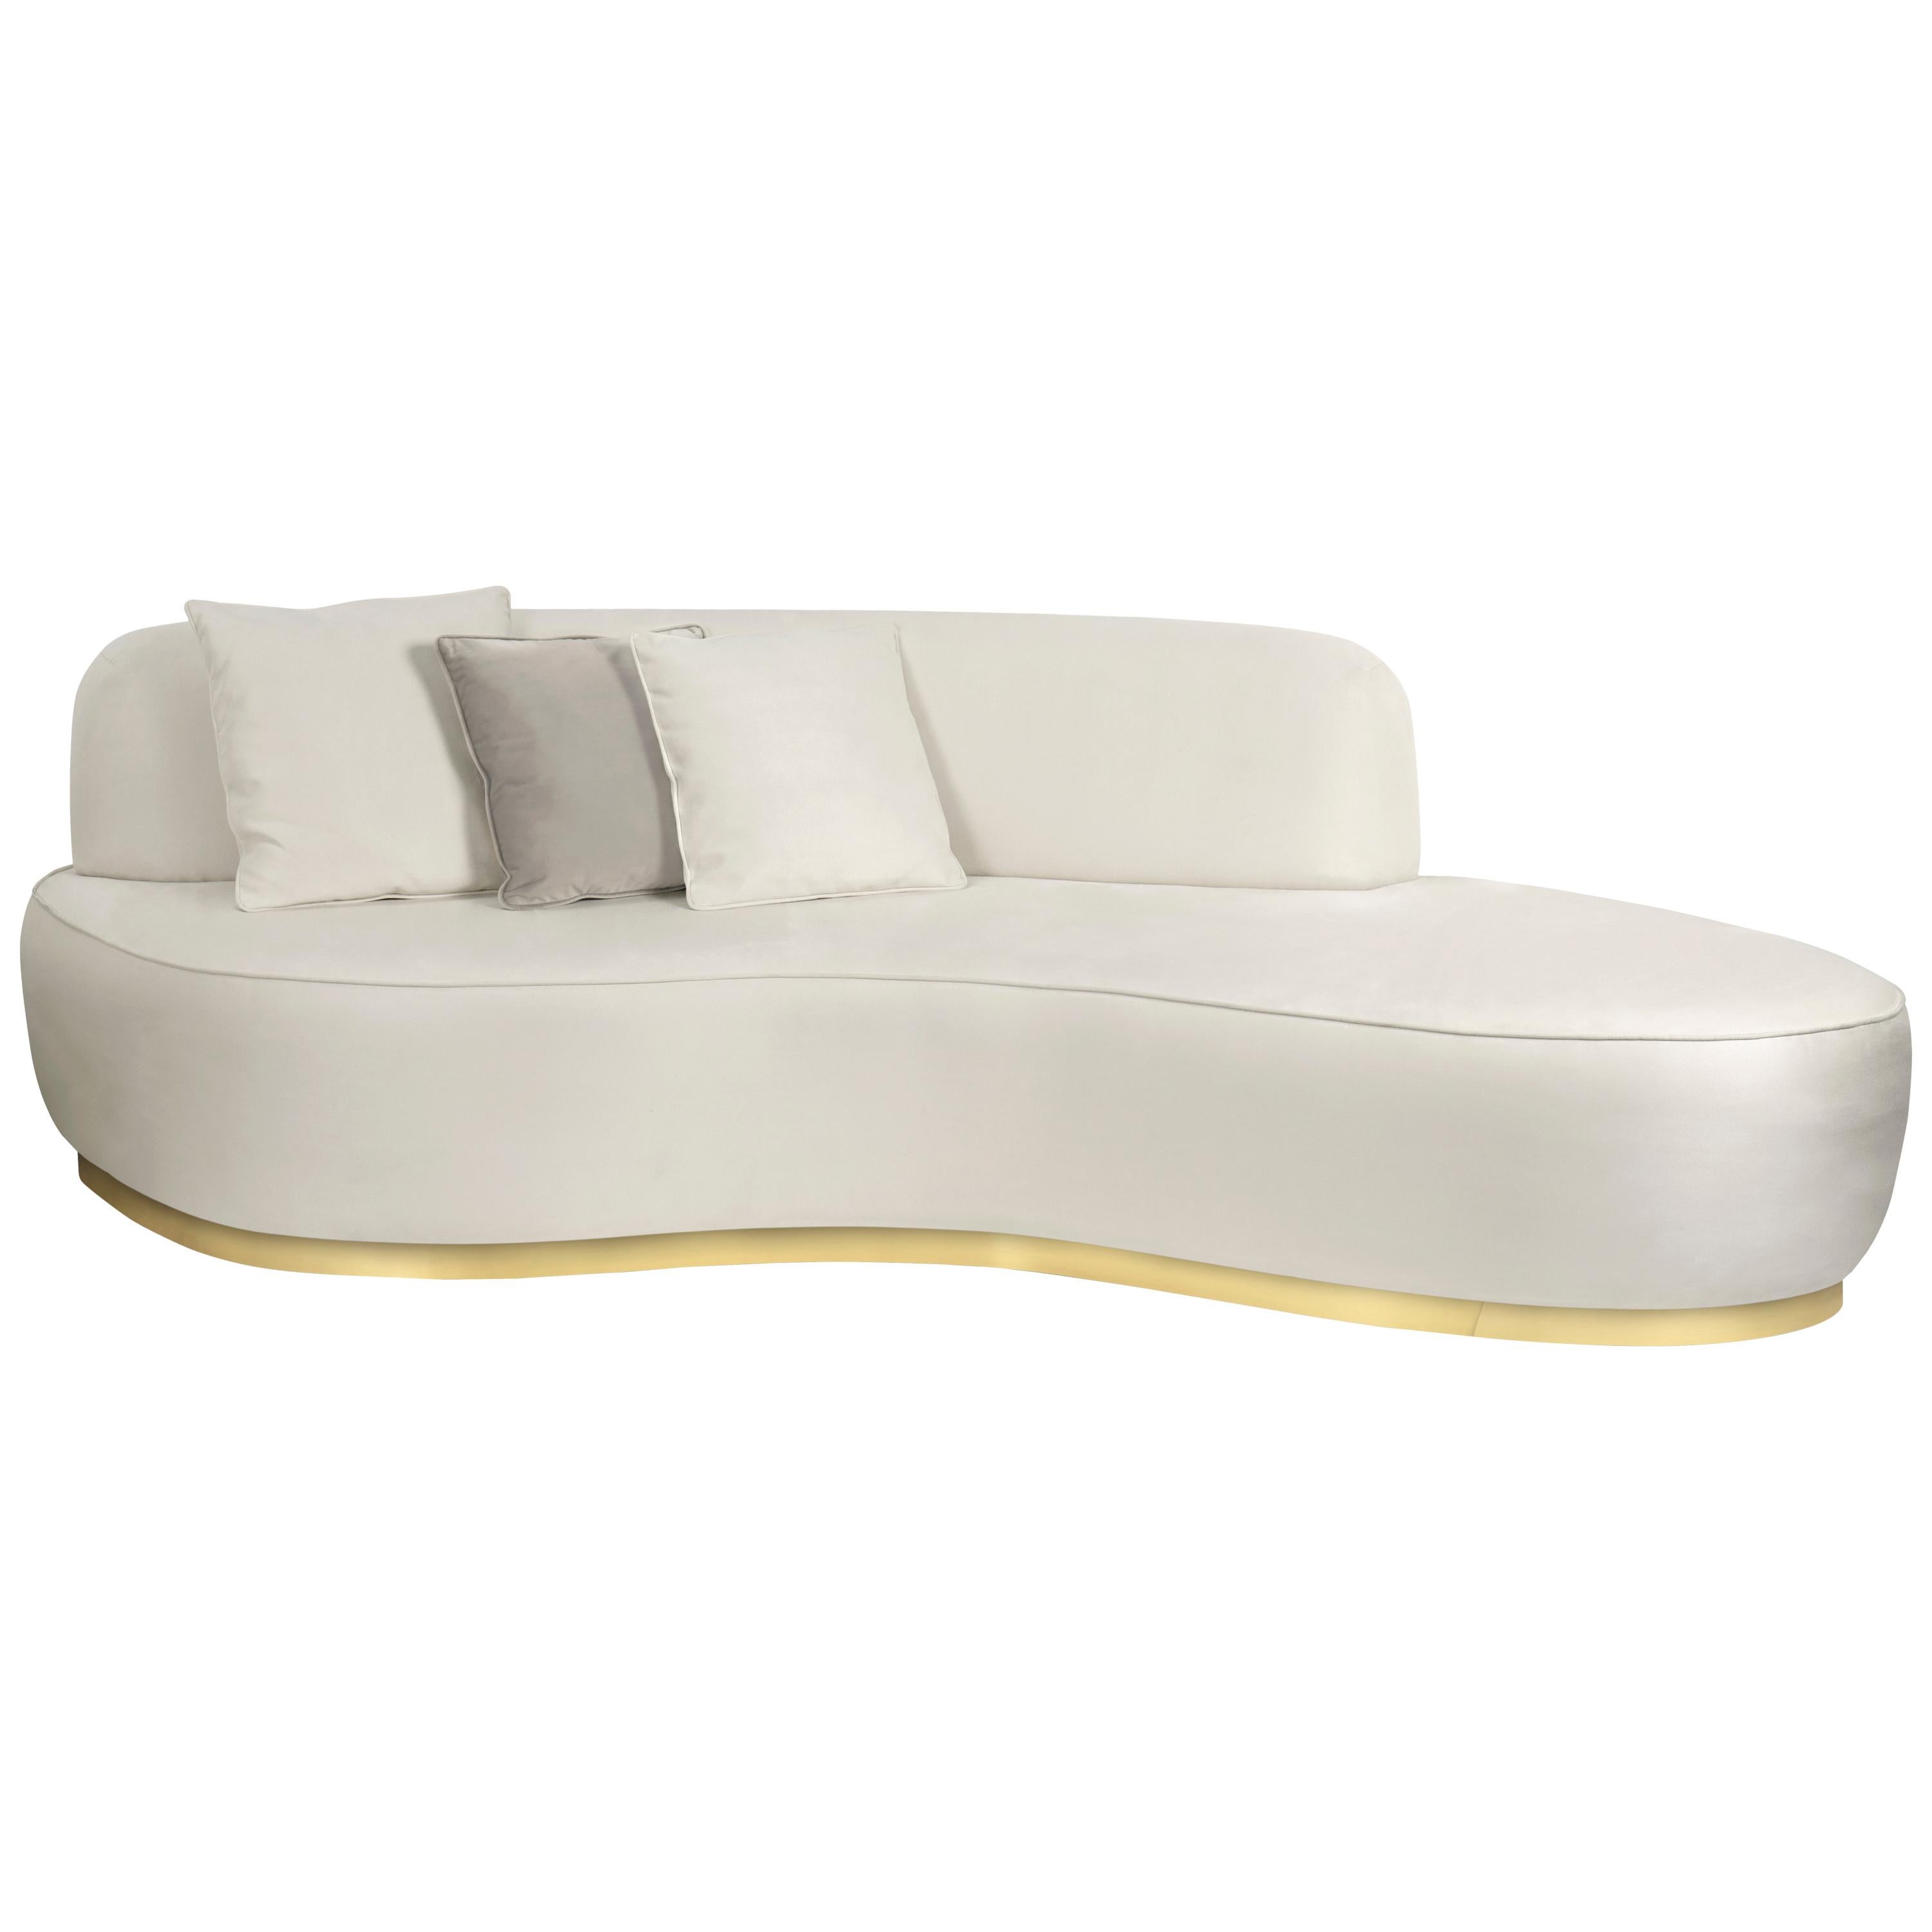 Inspired by the Swan Lake Op. 20, ballet composed by Pyotr Ilyich Tchaikovsky, Odette Modern Sofa tells the story of a princess turned into a swan by an evil sorcerer's curse. Its sweeping silhouette is accentuated with a polished brass structure